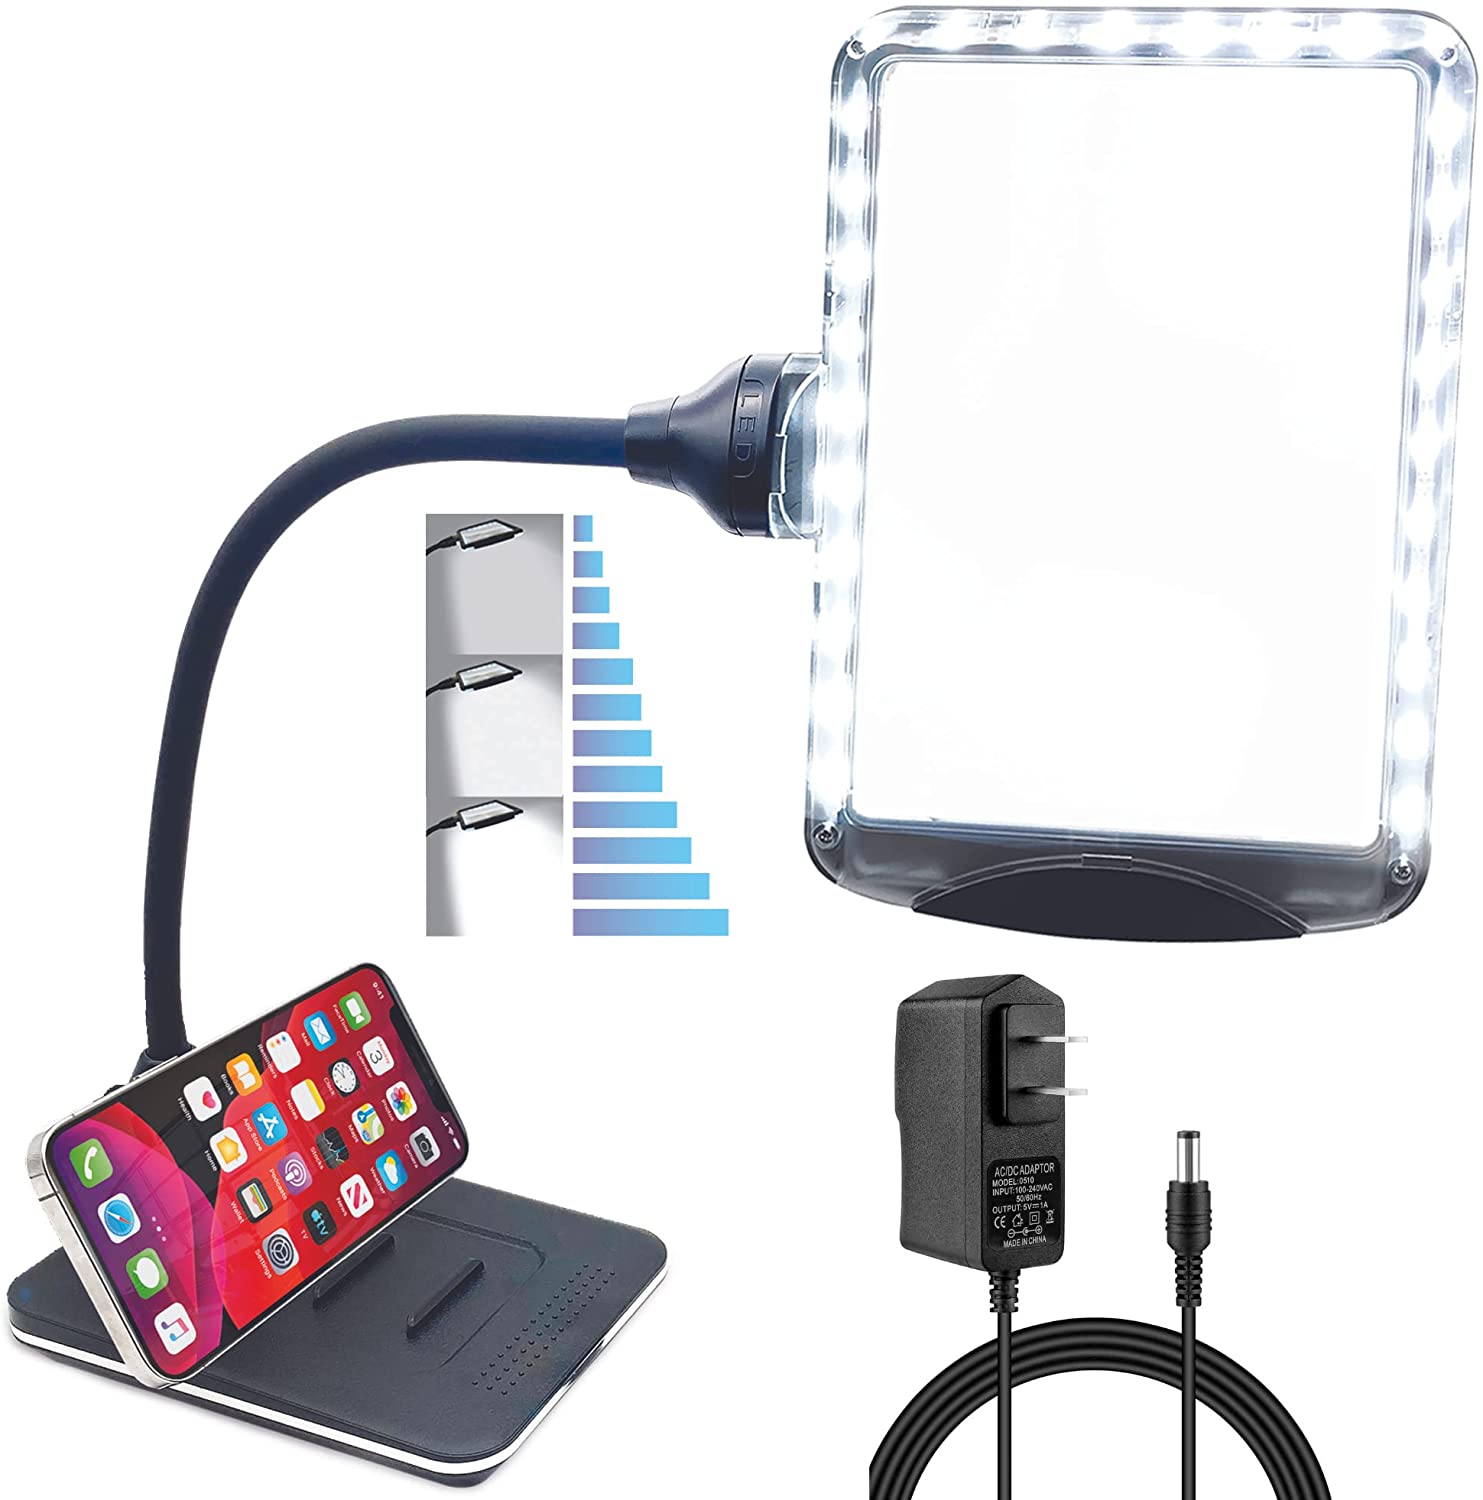 Lighted Stand/Page Magnifier, Hands-Free Magnifiers: Bernell Corporation